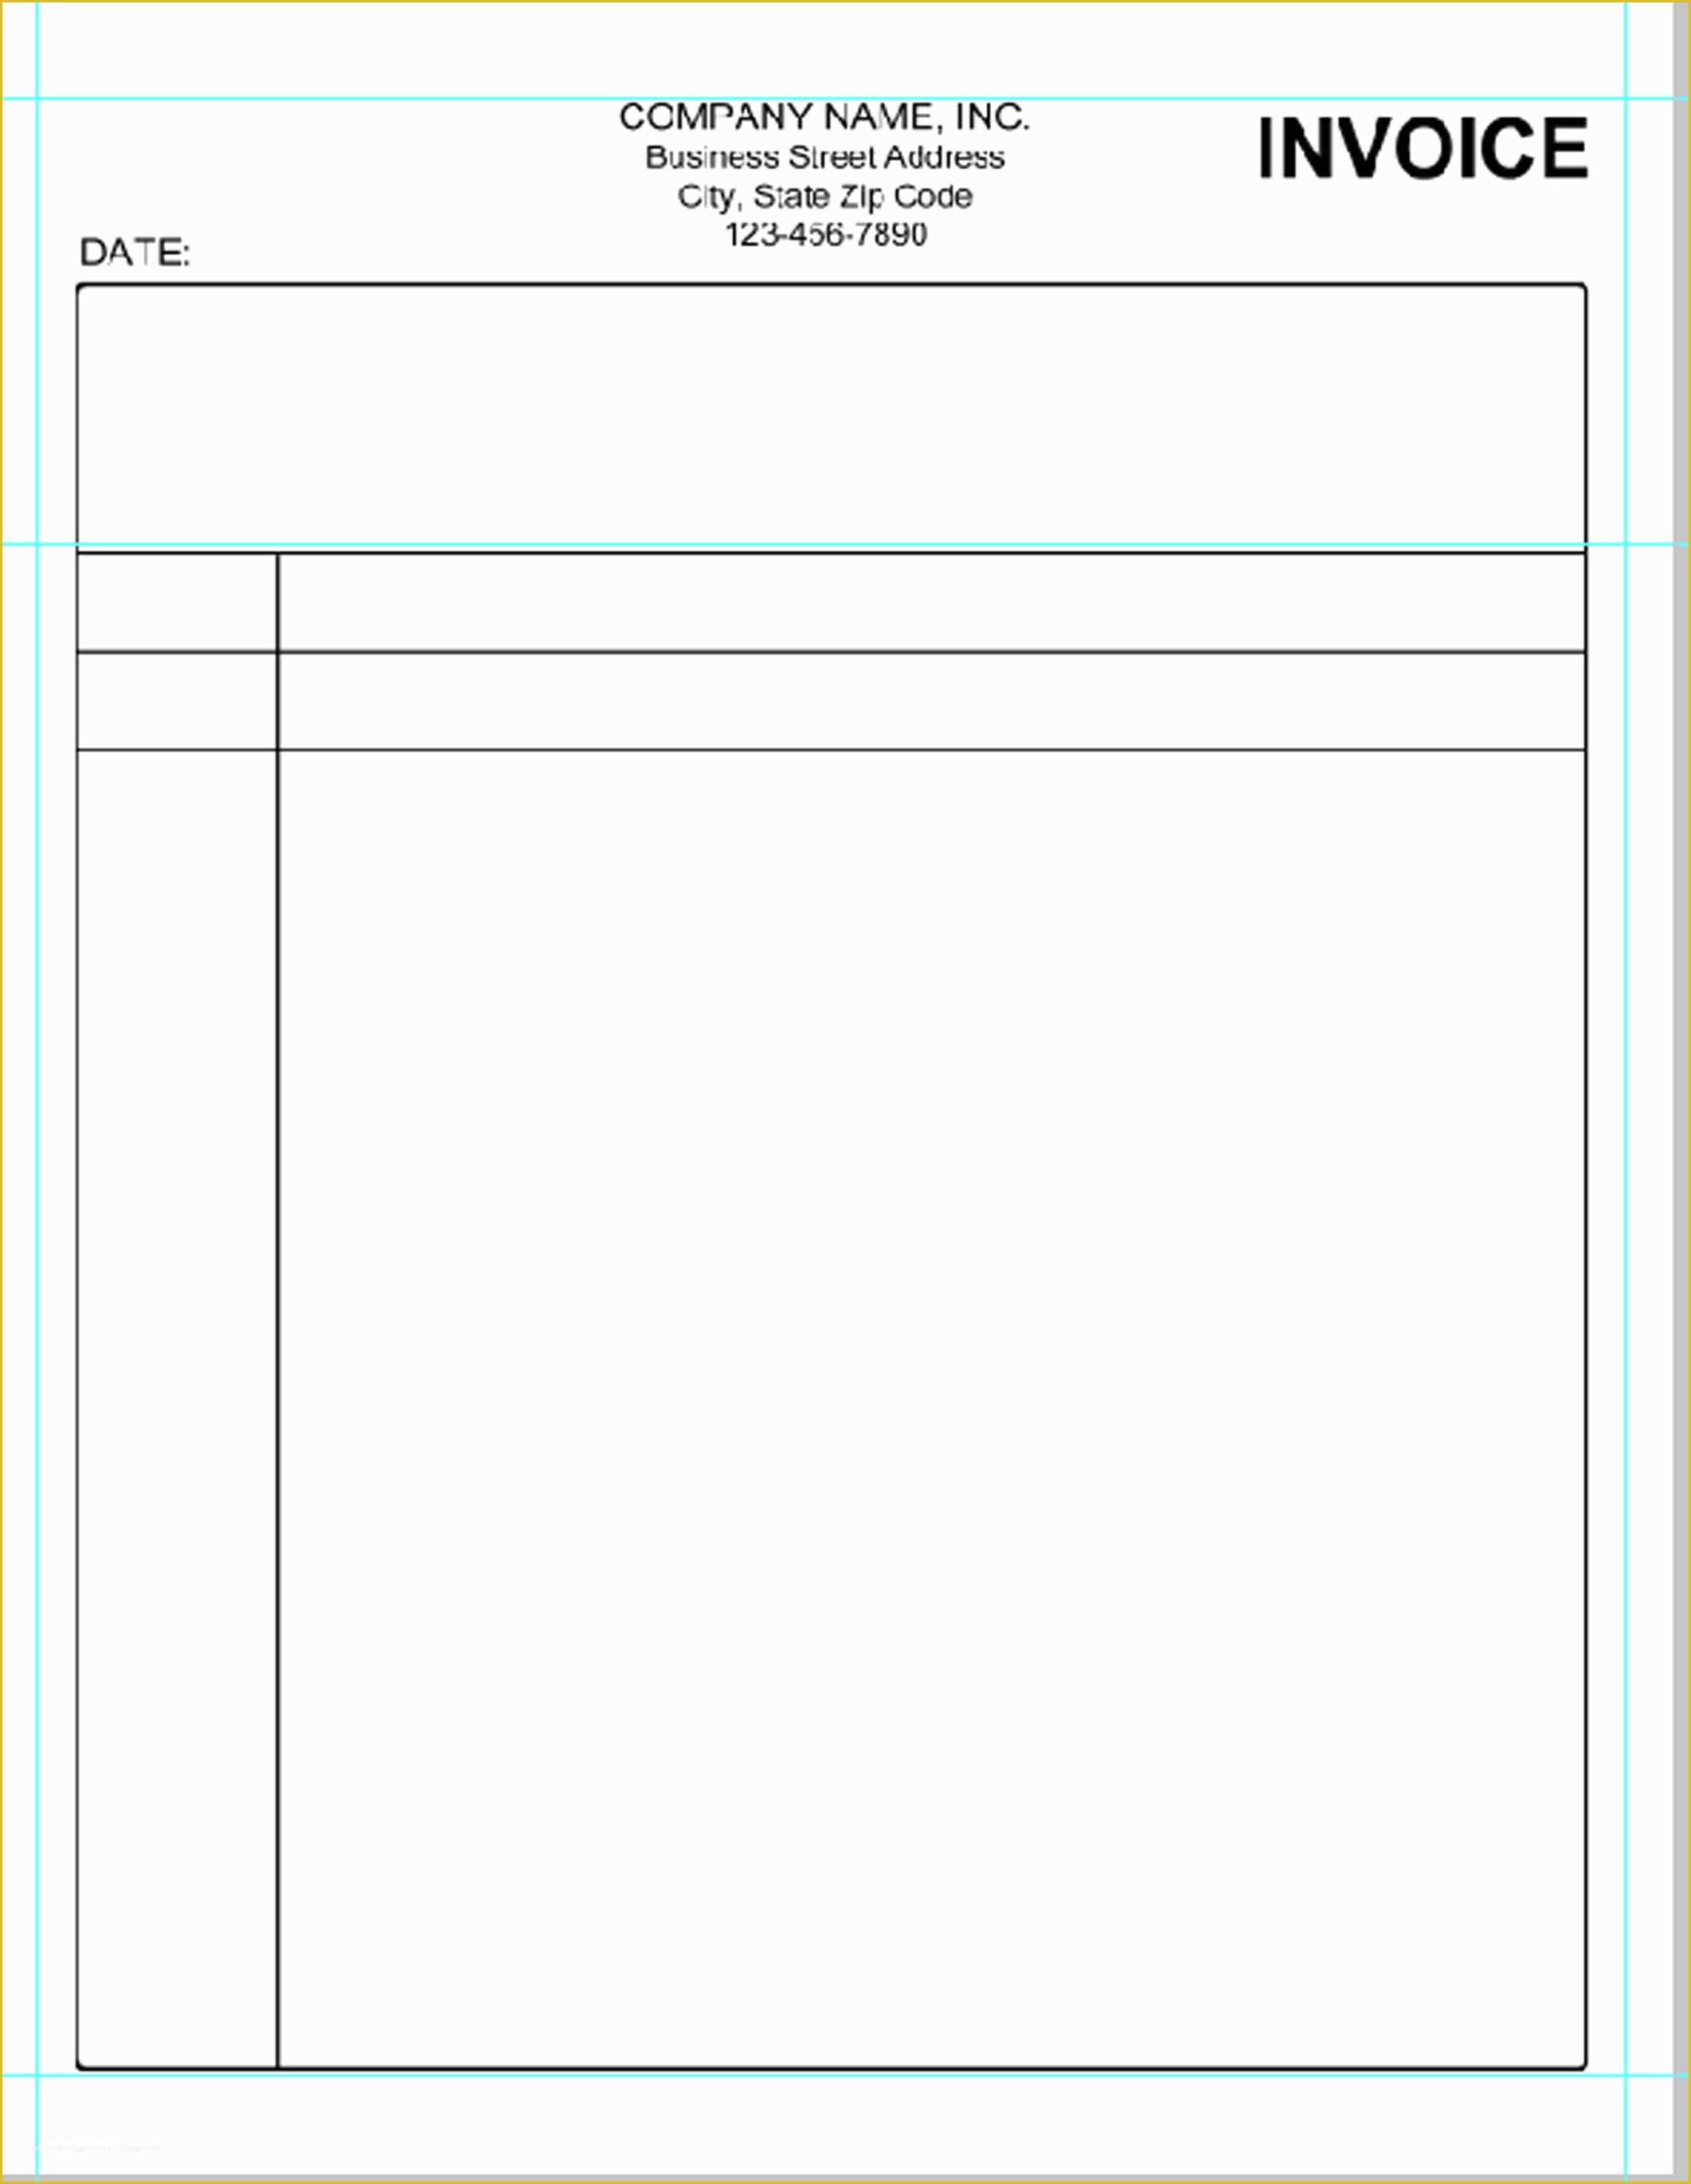 blank invoice template free download